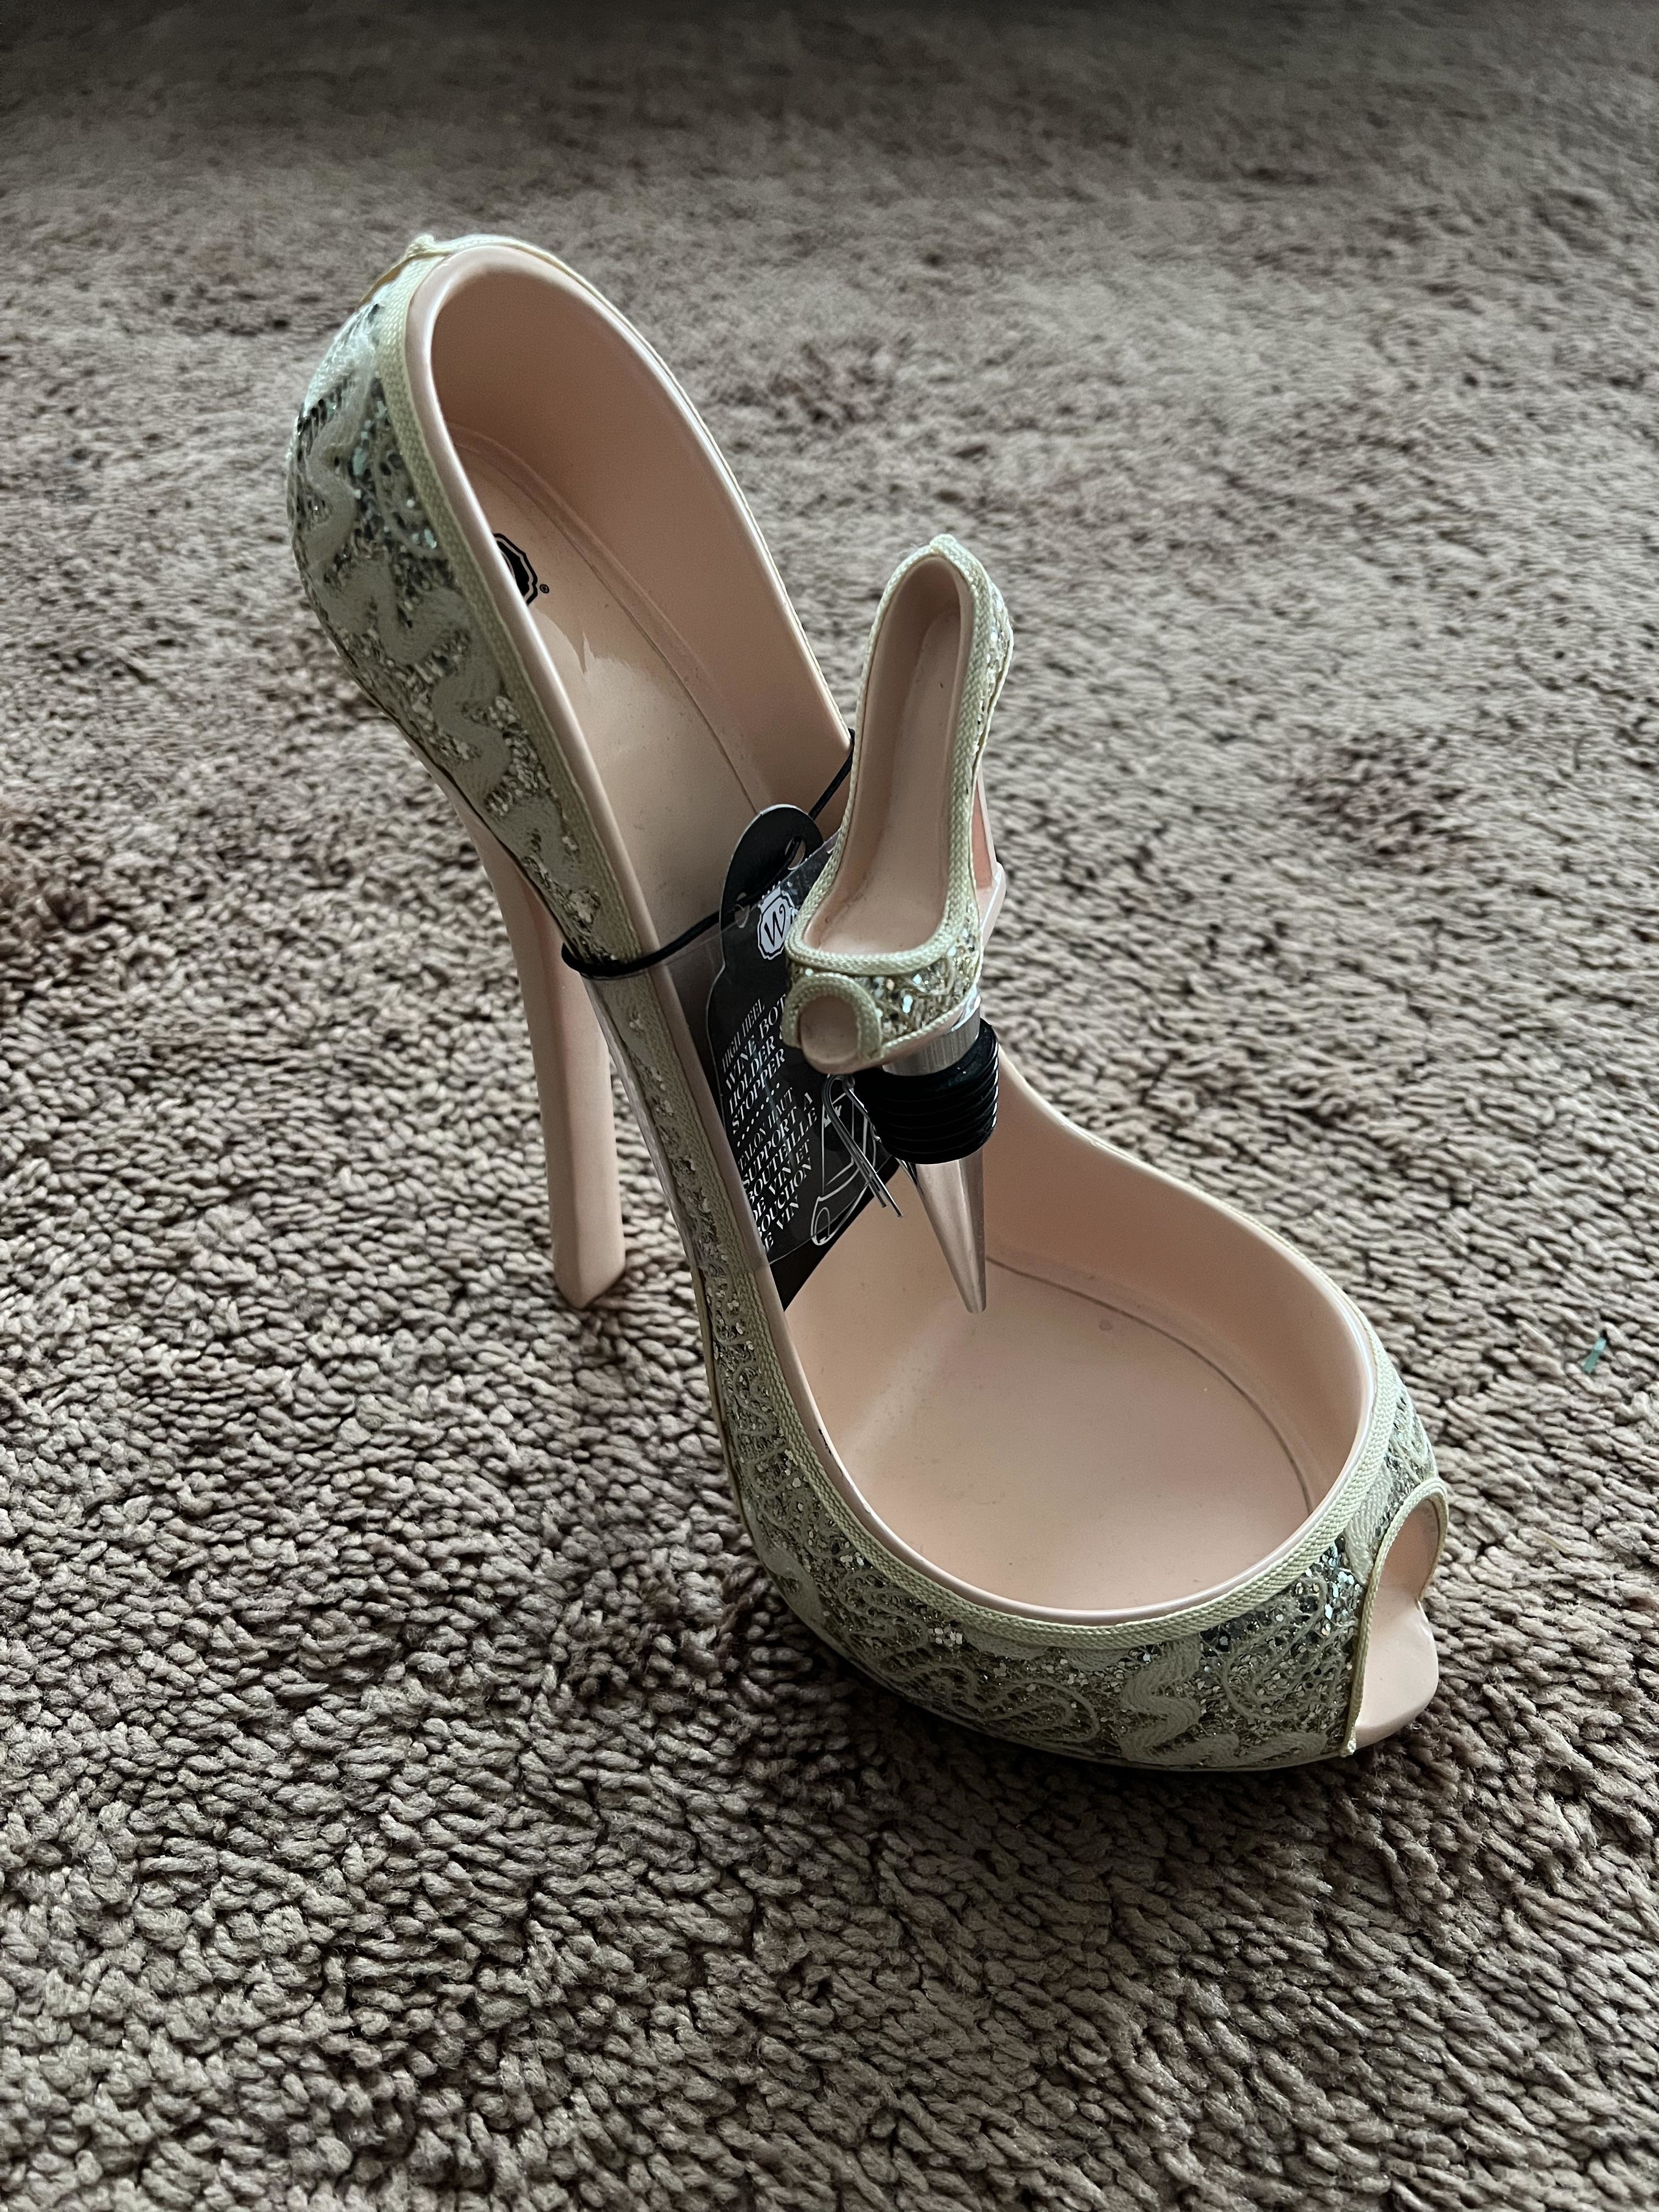 A single high-heel shoe with ornate design, with security tag attached, on a carpeted floor